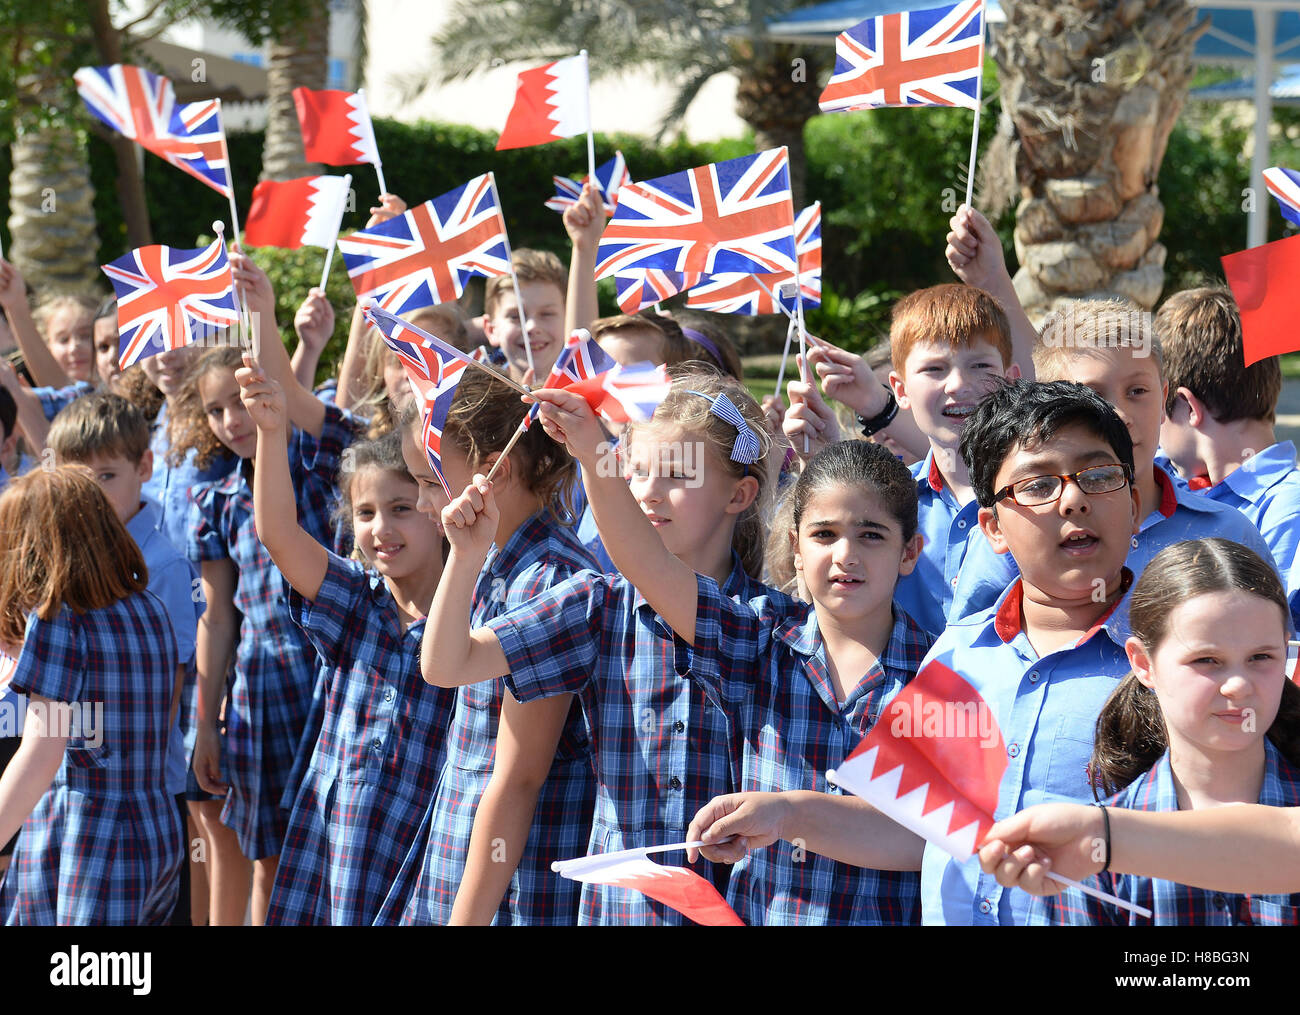 The Duchess of Cornwall is greeted by flag waving pupils at the St Christopher School in Manama, the capital city of Bahrain, during a visit to the country by the royal couple as part of their tour of the Middle East. PRESS ASSOCIATION Photo, Picture date: Thursday November 10, 2016. See PA story ROYAL Tour. Photo credit should read: John Stillwell/PA Wire Stock Photo